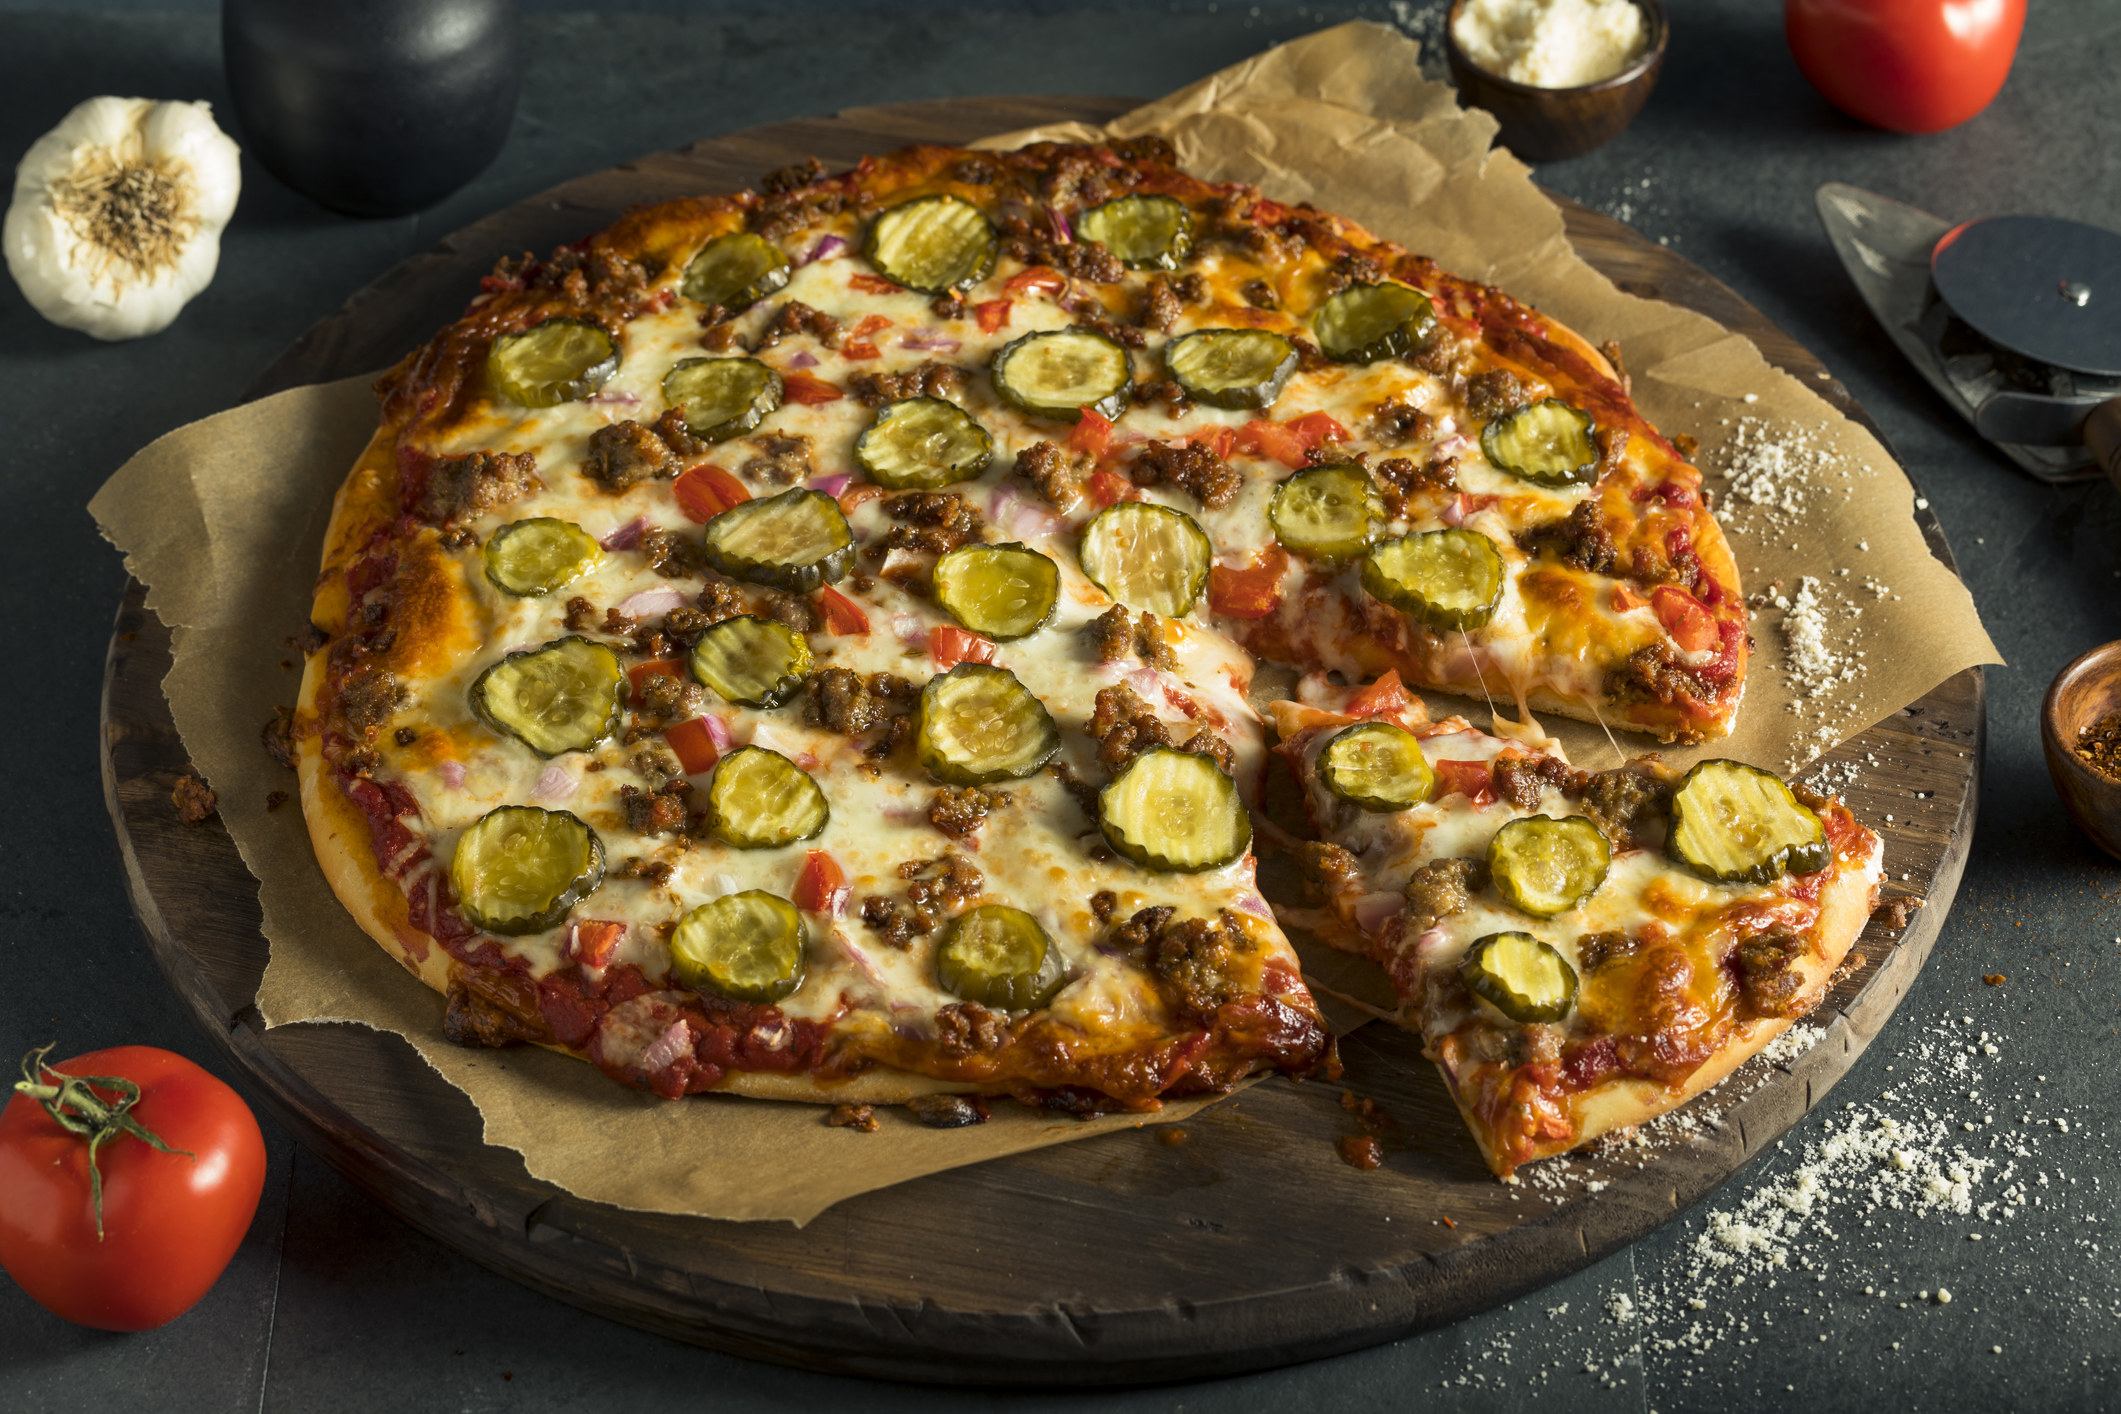 A pizza pie with sliced pickles as a topping